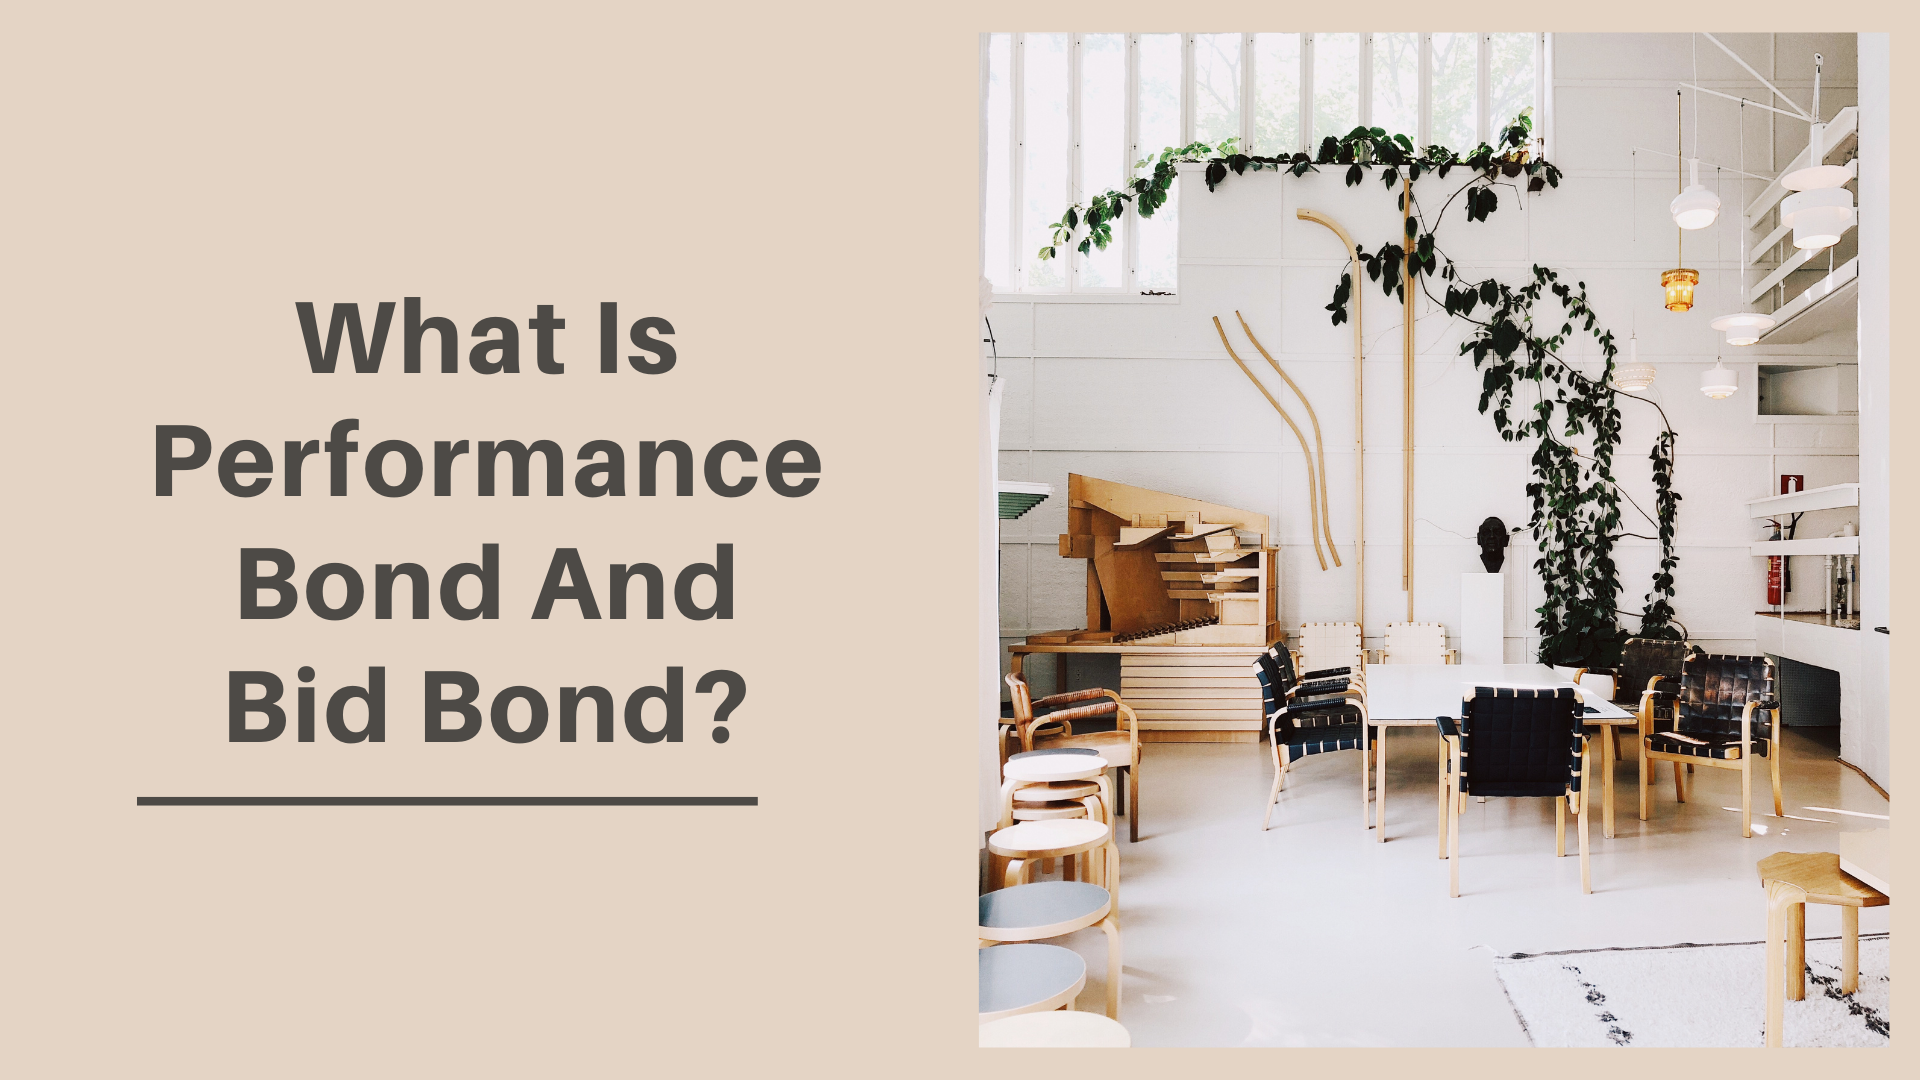 bid bond - What is a performance bond and what does it cover - minimalist interior